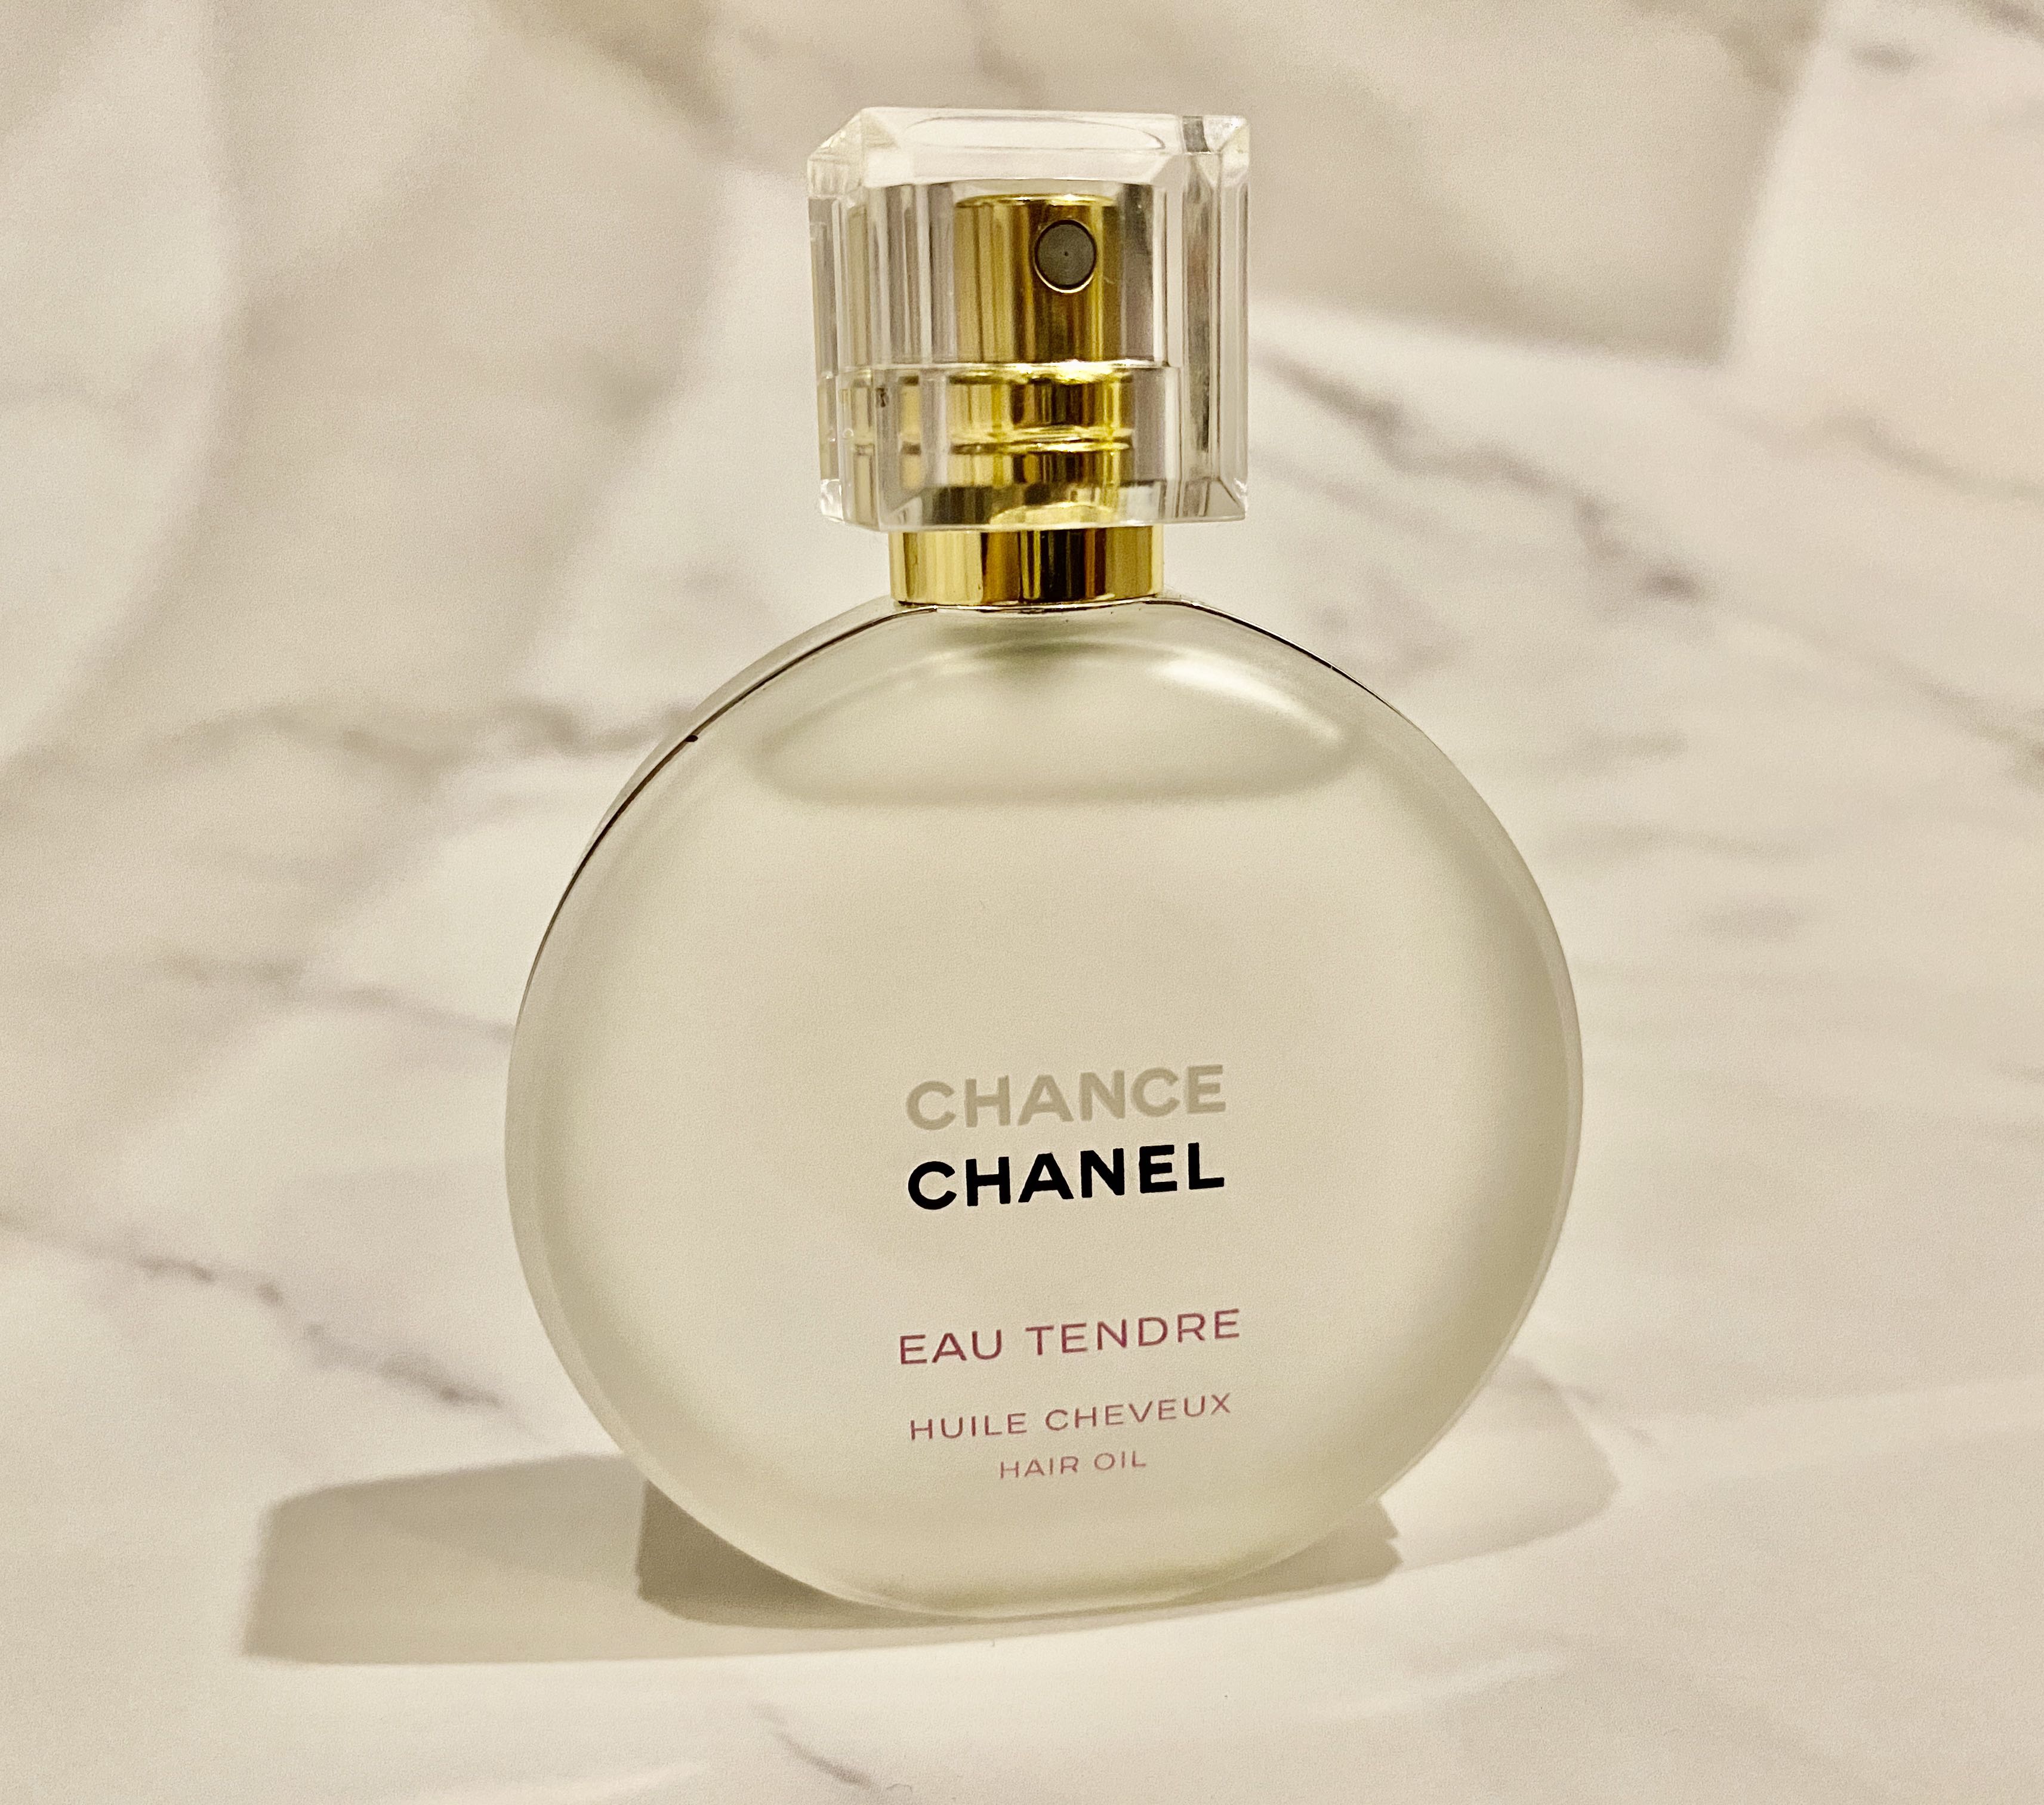 New! CHANEL Chance Eau Tendre Hair Oil Perfume 35 ml., Beauty & Personal  Care, Fragrance & Deodorants on Carousell